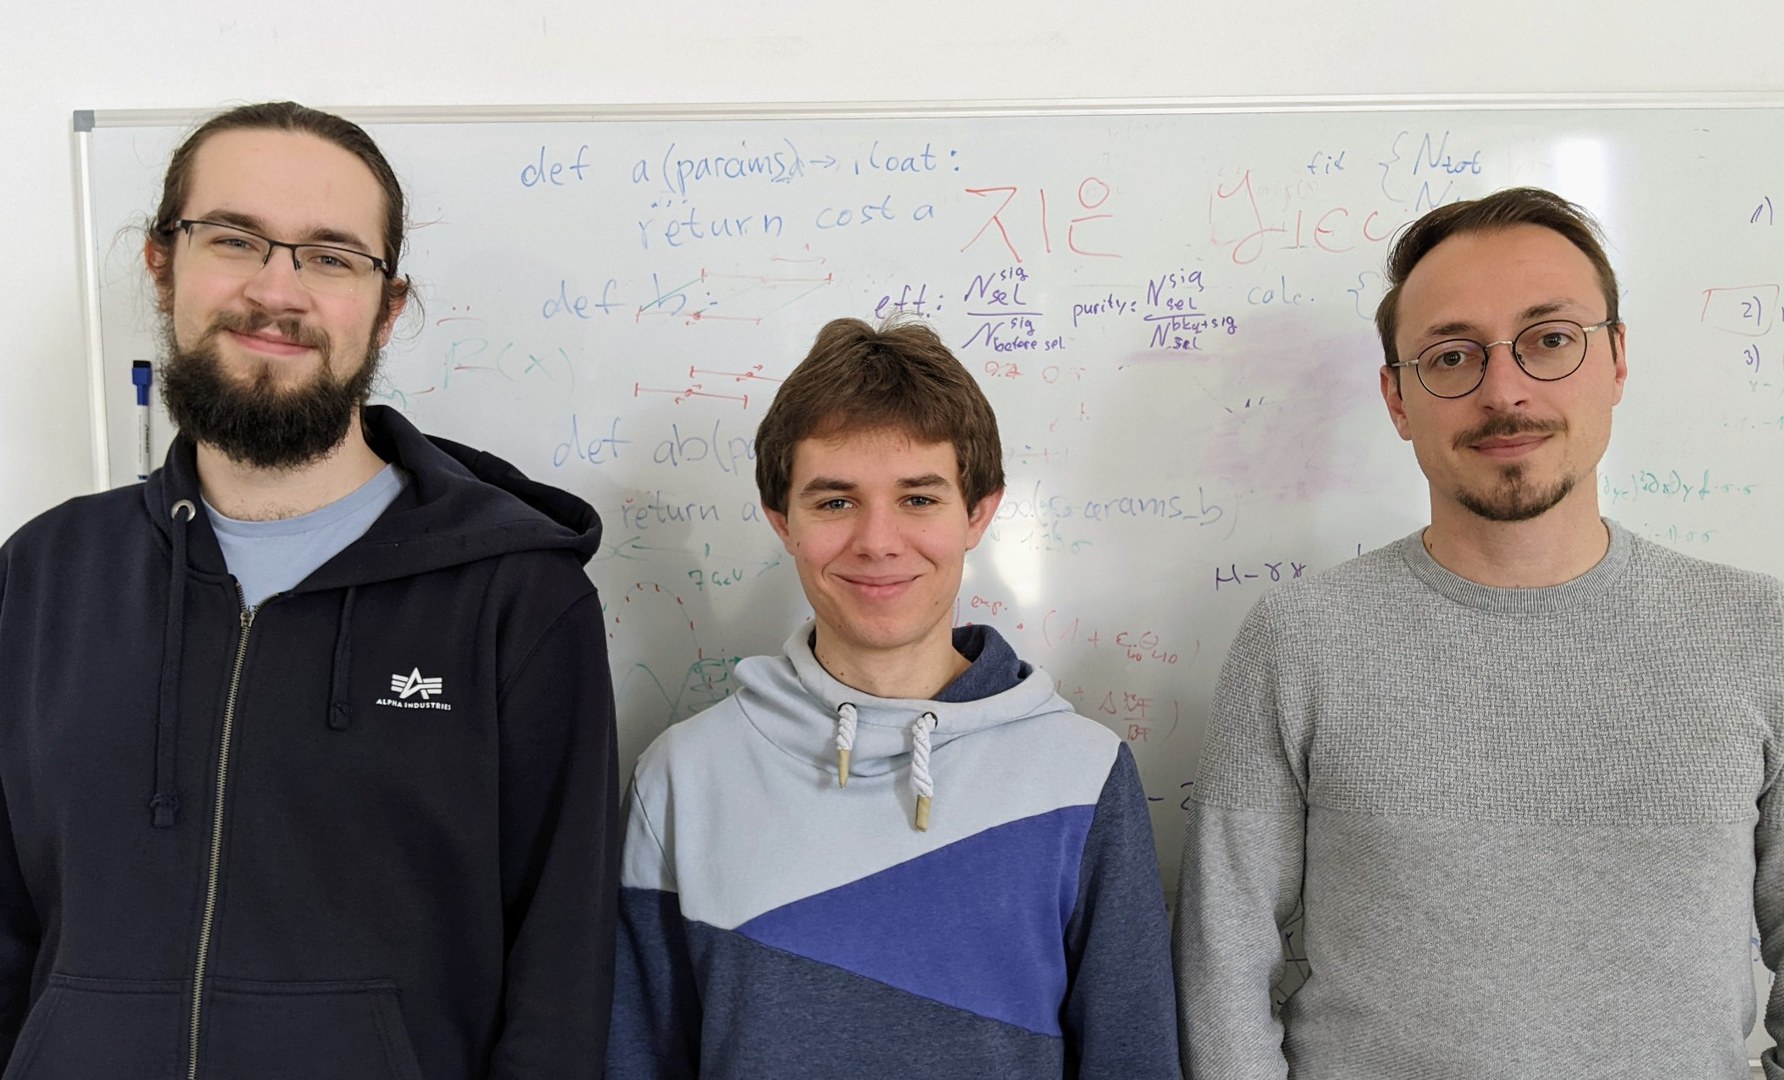 Bonn Team - The FASER team from Bonn University, which played a key role in the discovery: Tobias Blesgen (as part of his bachelor thesis), Tobias Böckh (as part of his PhD) and Dr. Markus Prim (from left to right).